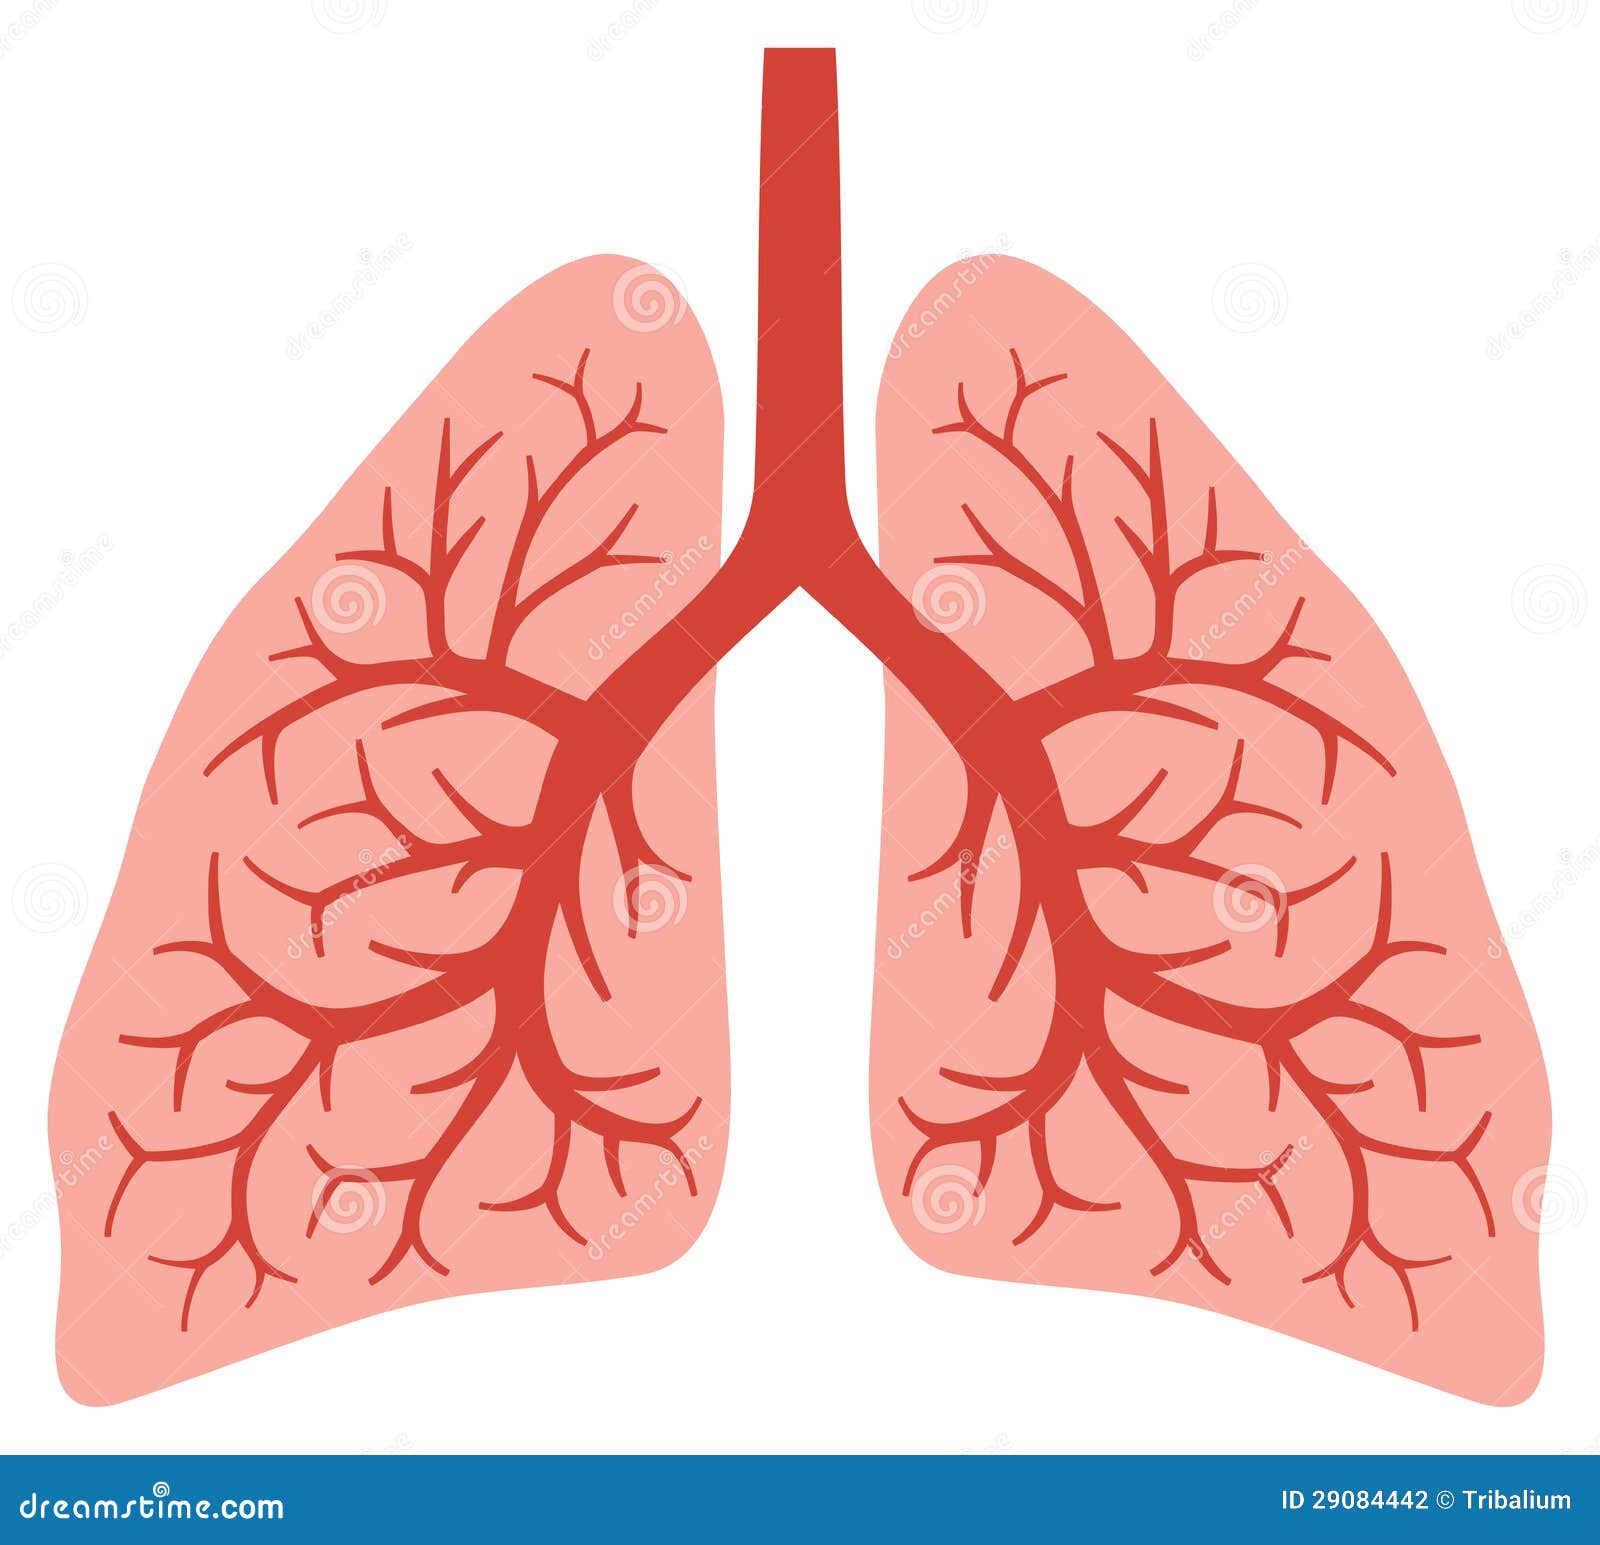 clipart human lungs - photo #23